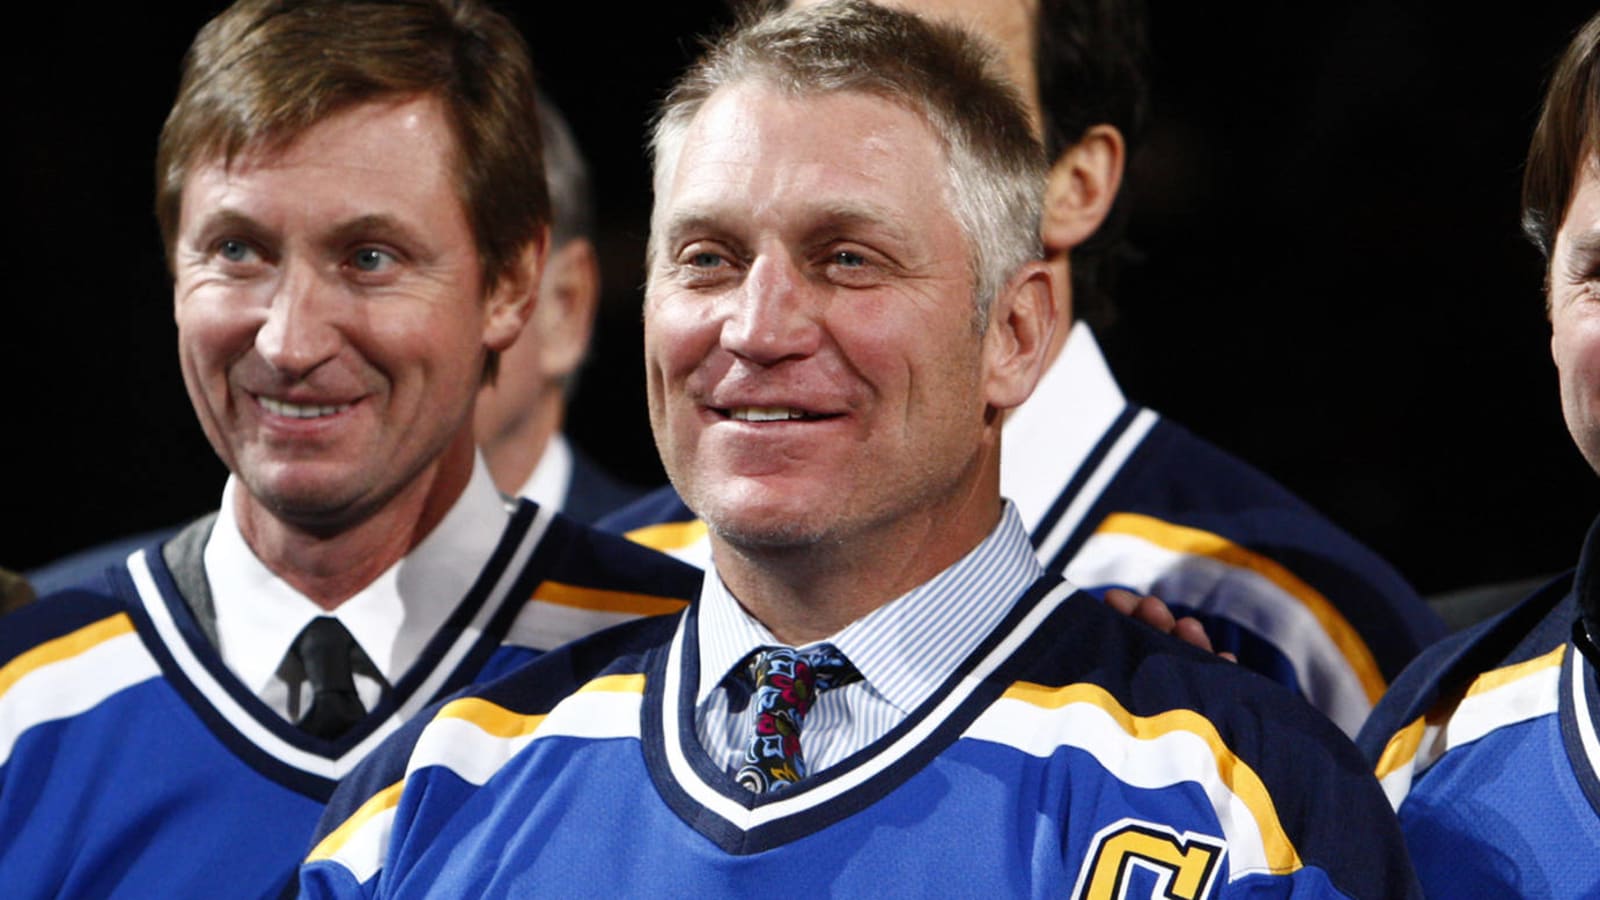 Watch: A possibly tipsy Brett Hull tries to start chant at Blues’ parade